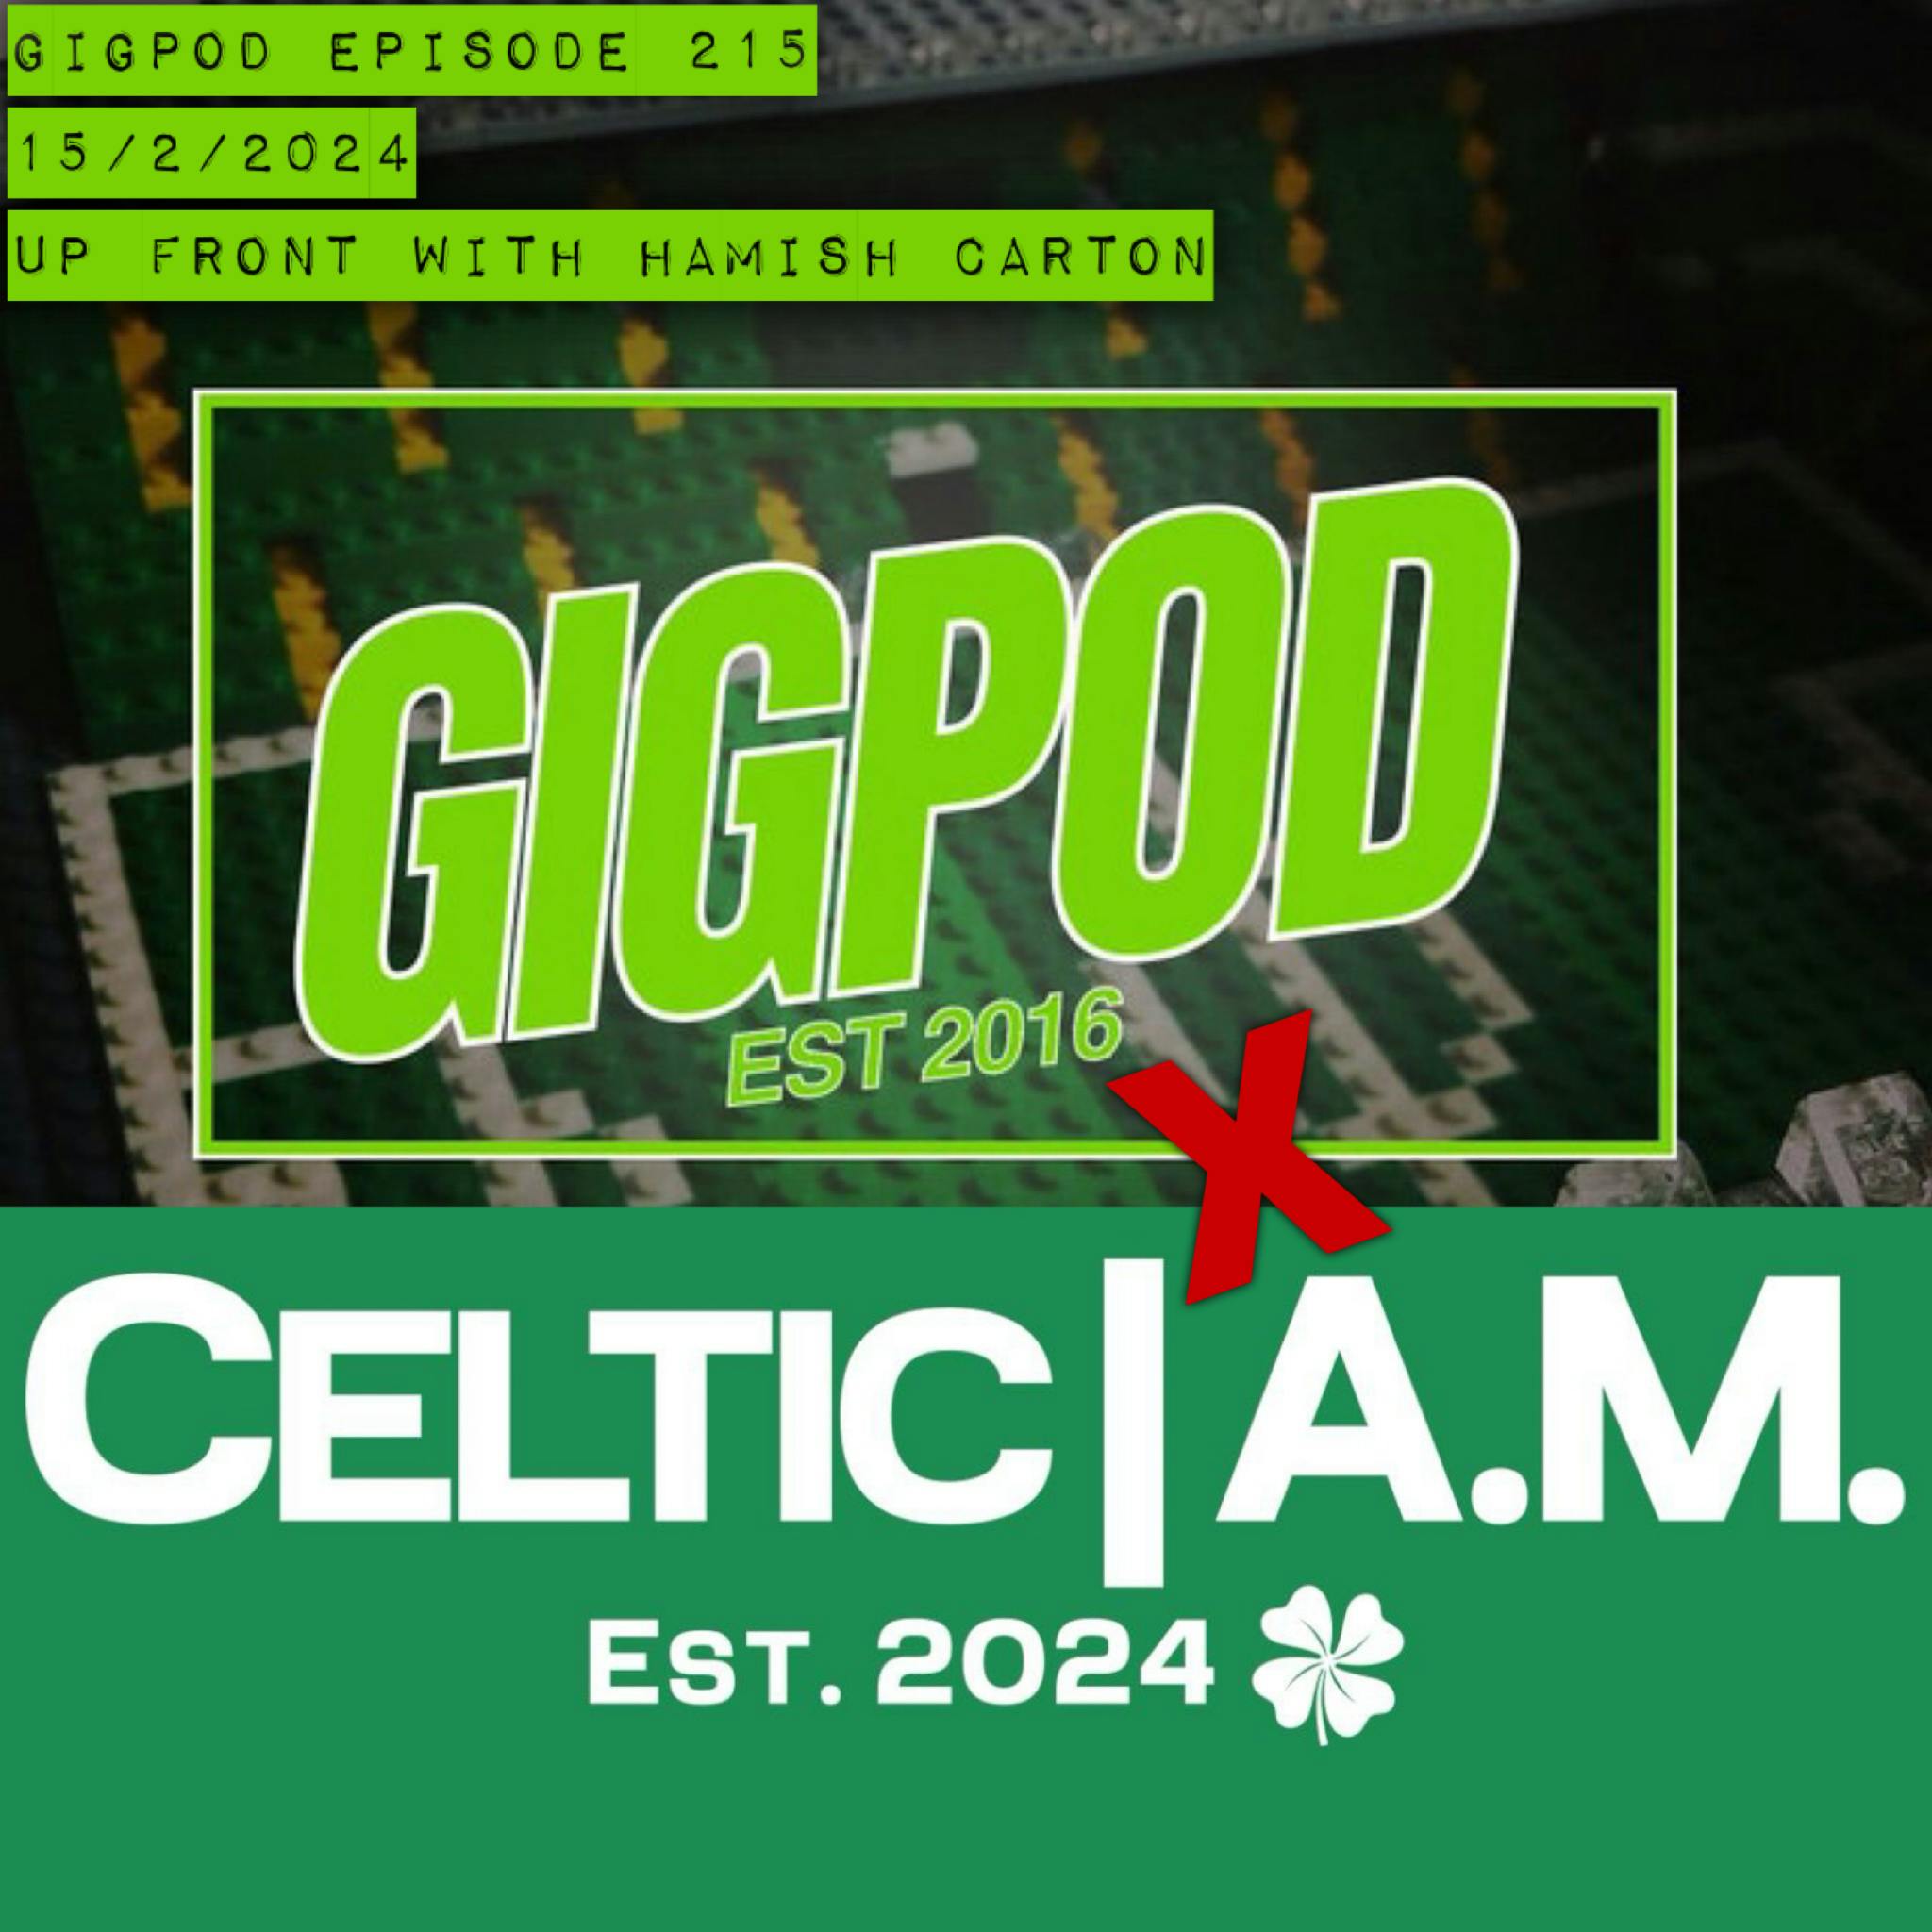 GIGPOD EP 215: UP FRONT WITH HAMISH CARTON